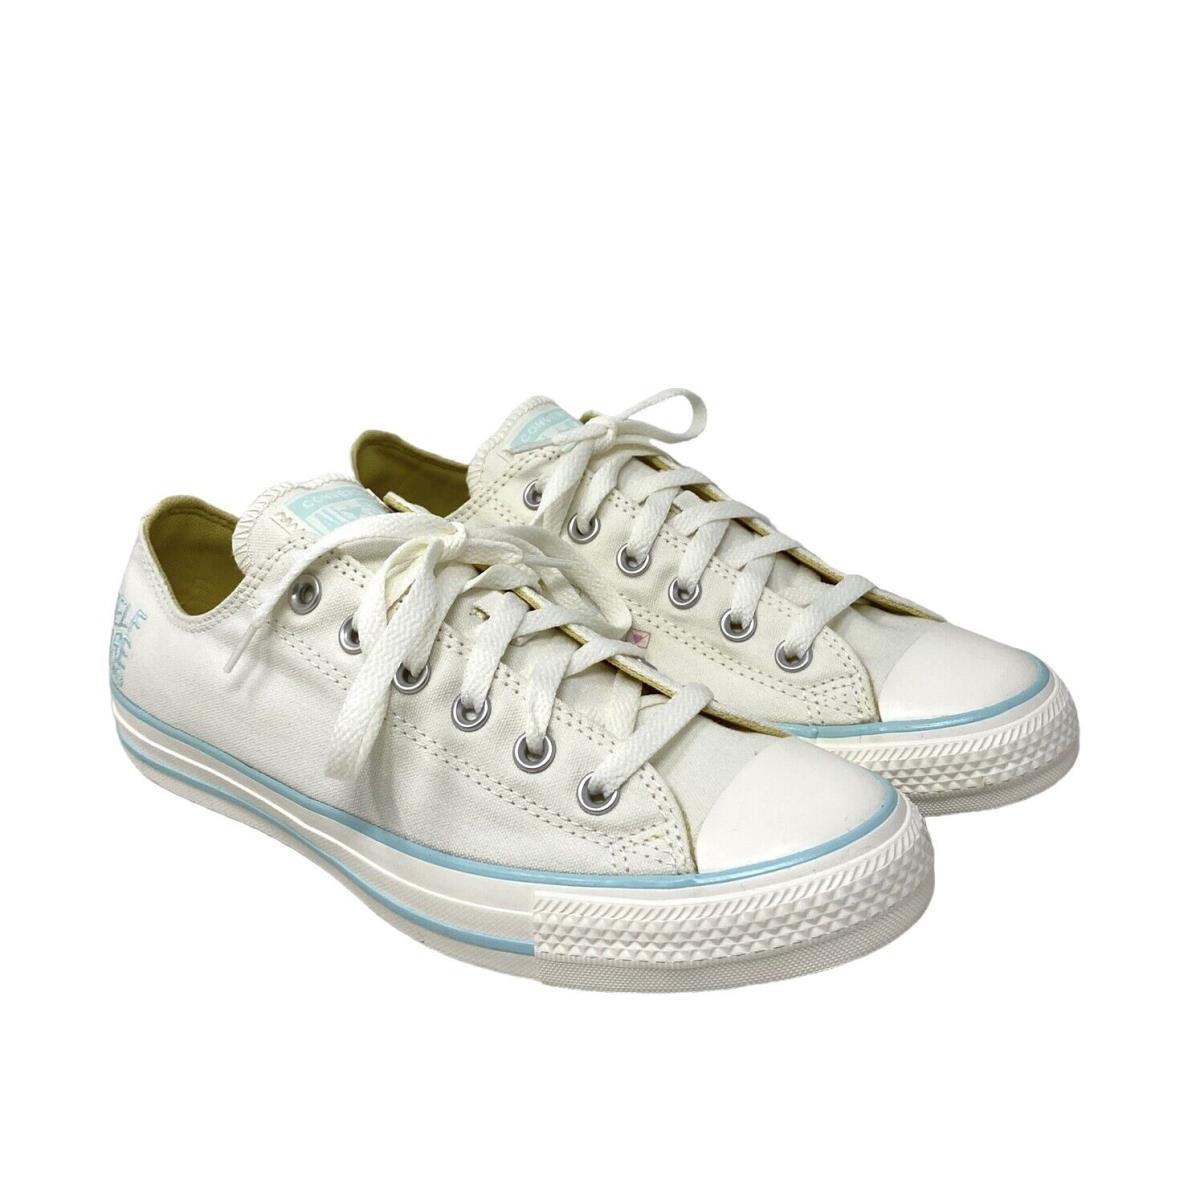 Converse Chuck Taylor OX Egret Shoe Low Top Casual Women`s Size Sneakers A08219F